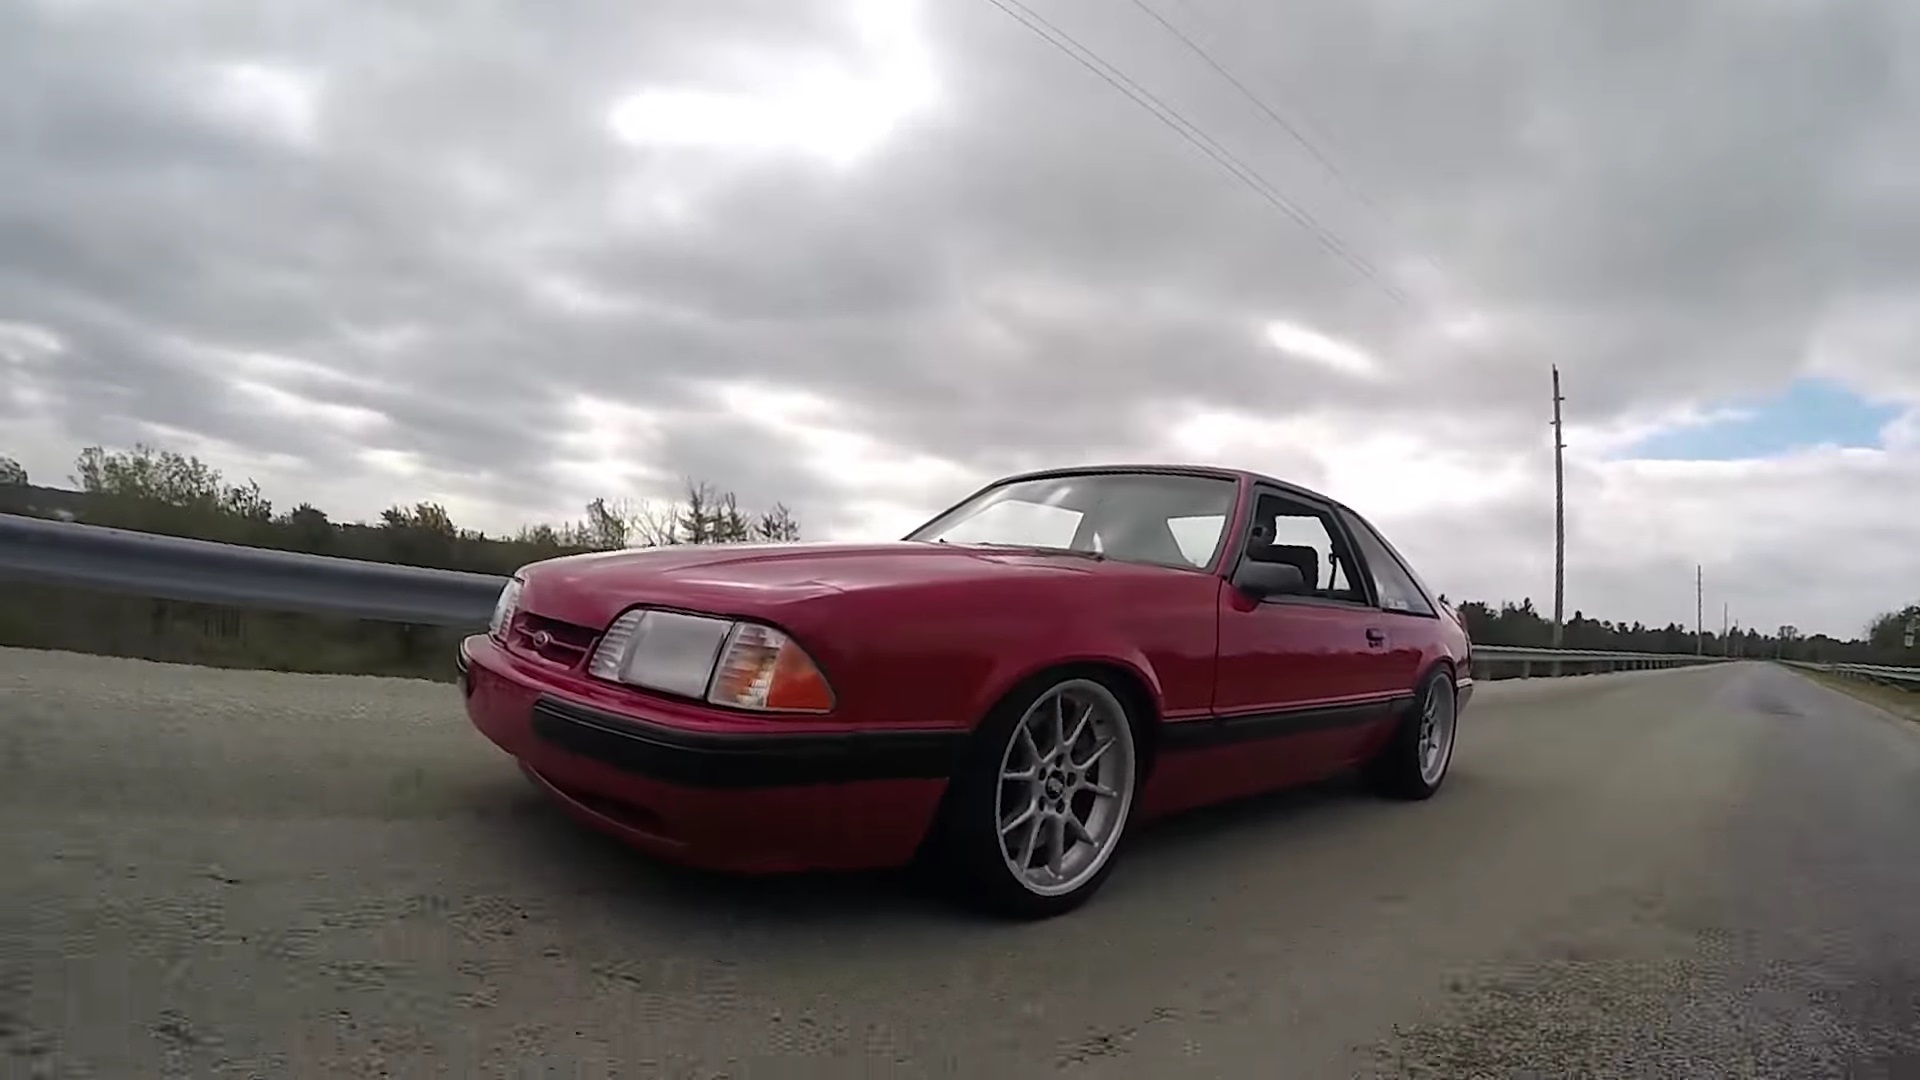 Video: Cruising In A 1989 Ford Mustang LX